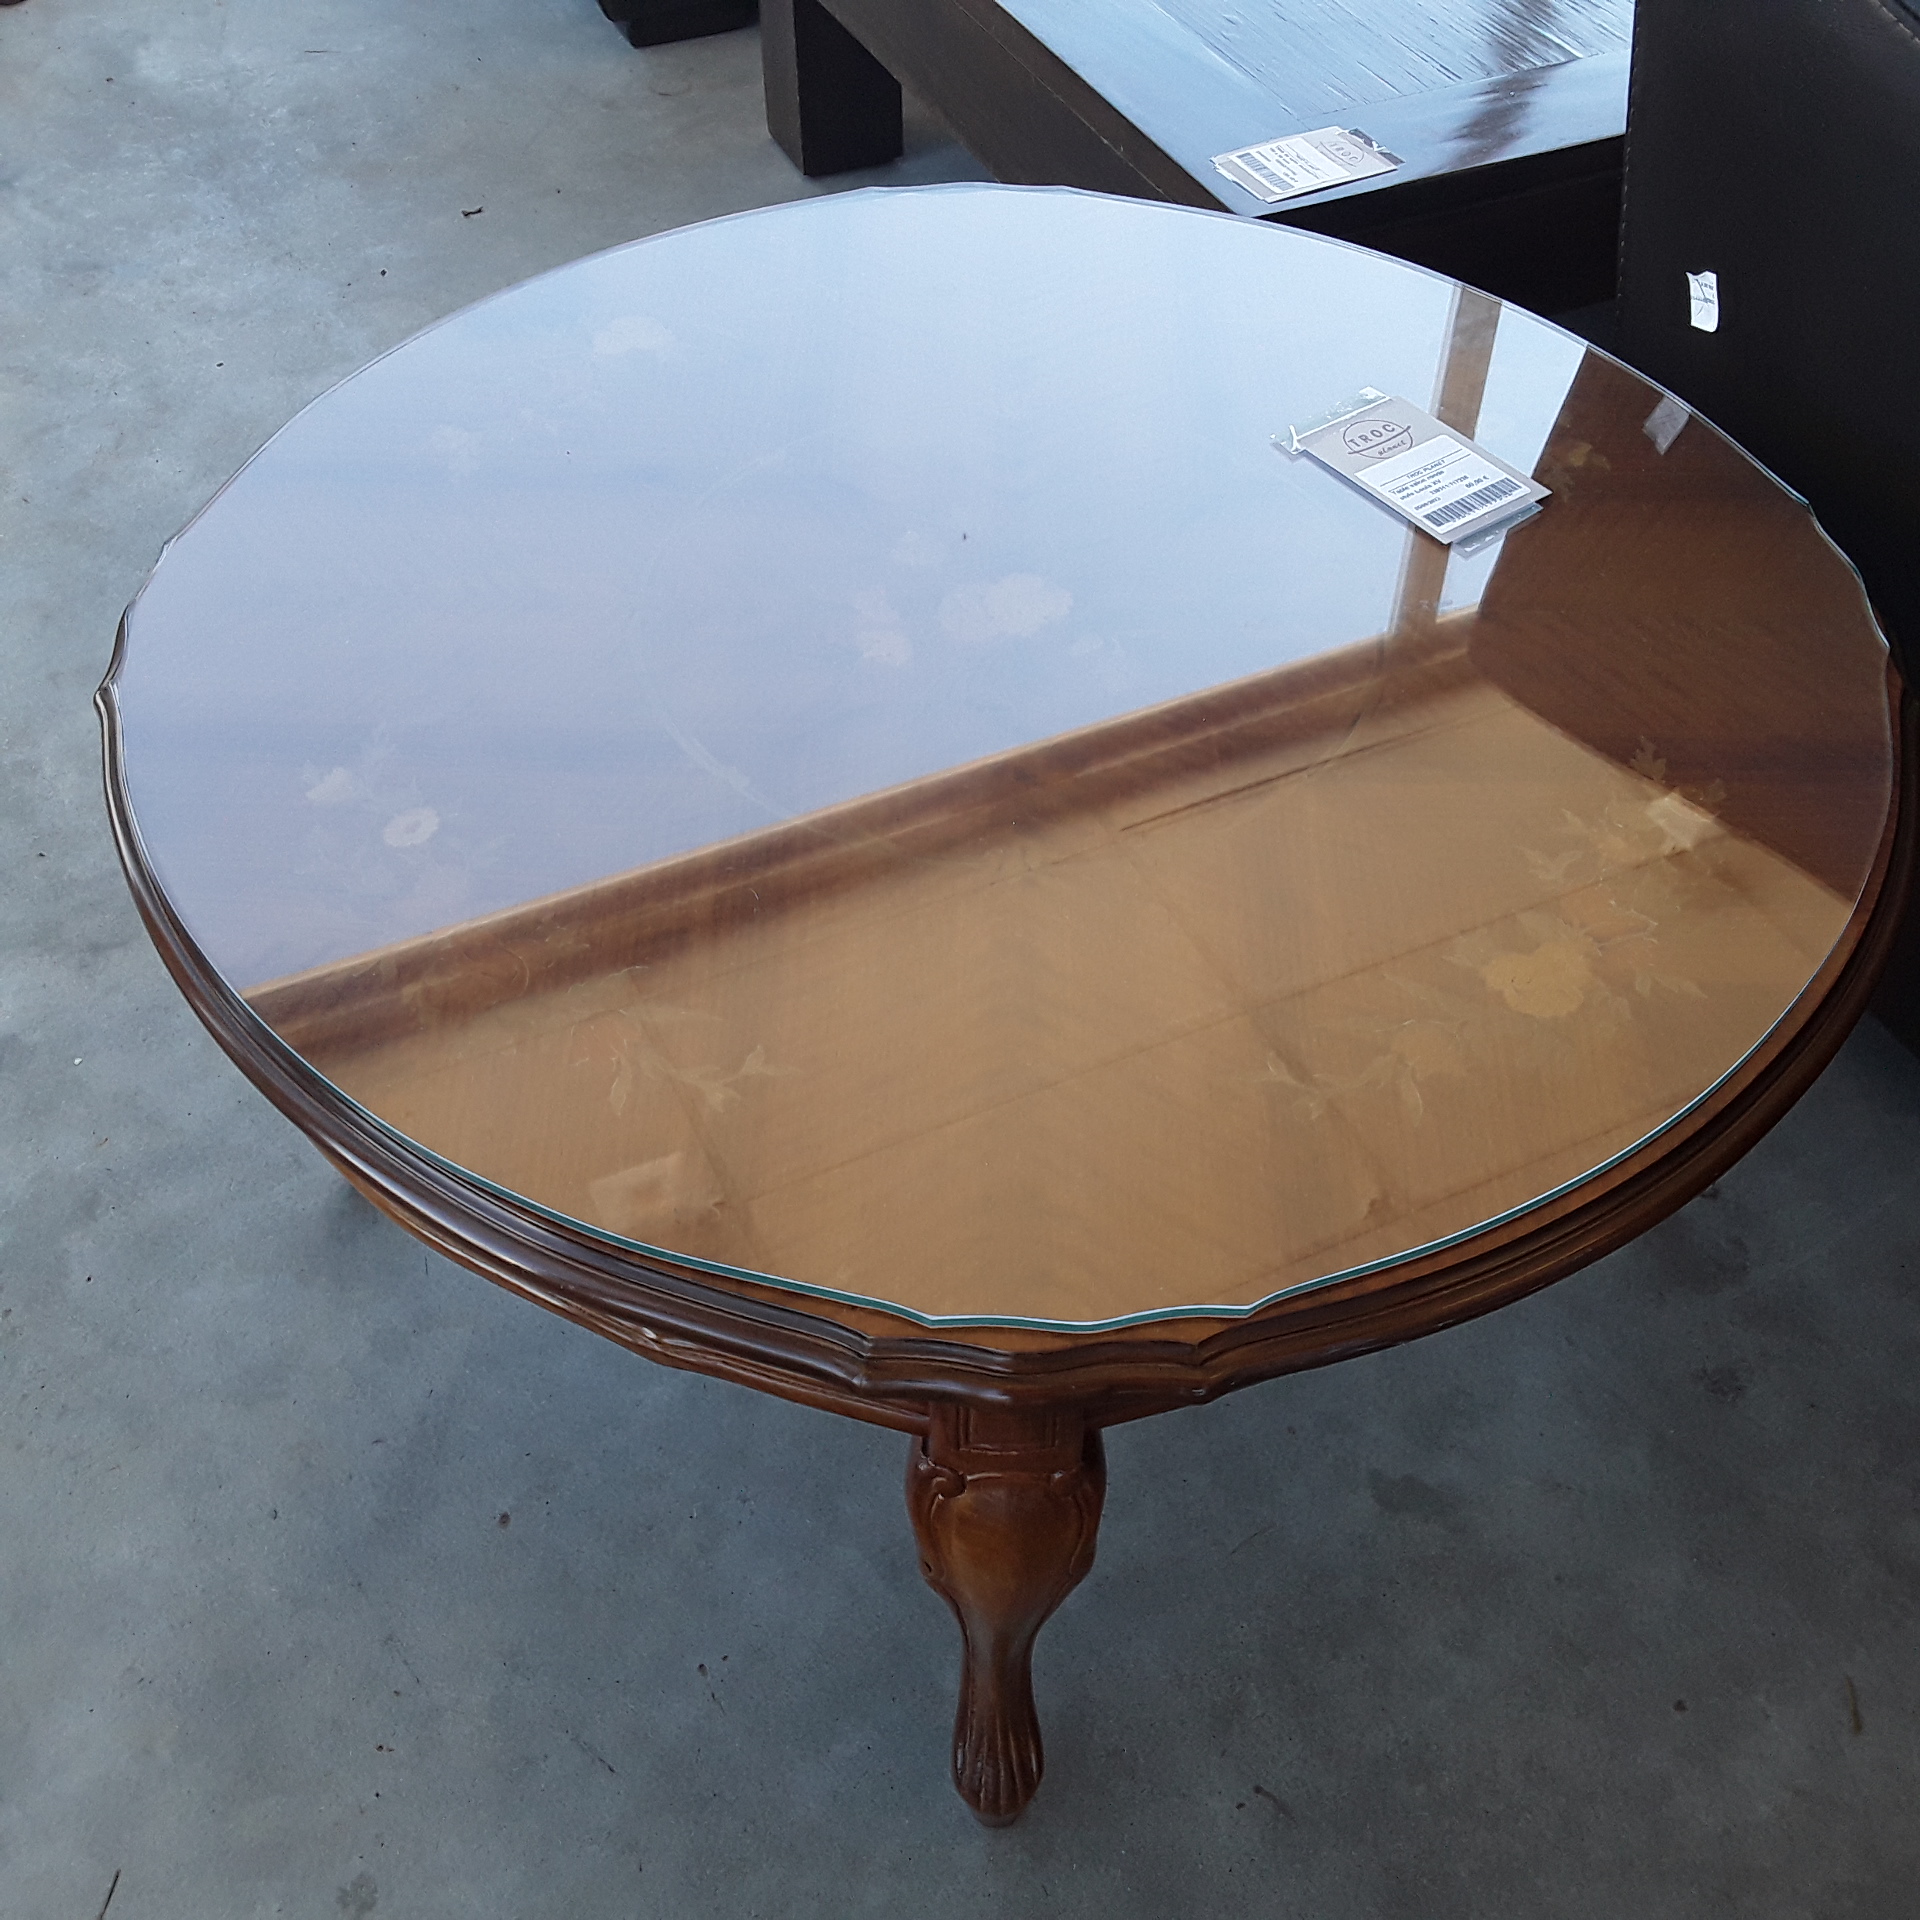 <p>Table salon ronde<br />style Louis XV<br />60,00 € T.T.C<br /><a href="/Article/117236?type=depose" style="color:white;" target="_blank">Lien vers l&#39;article</a></p>